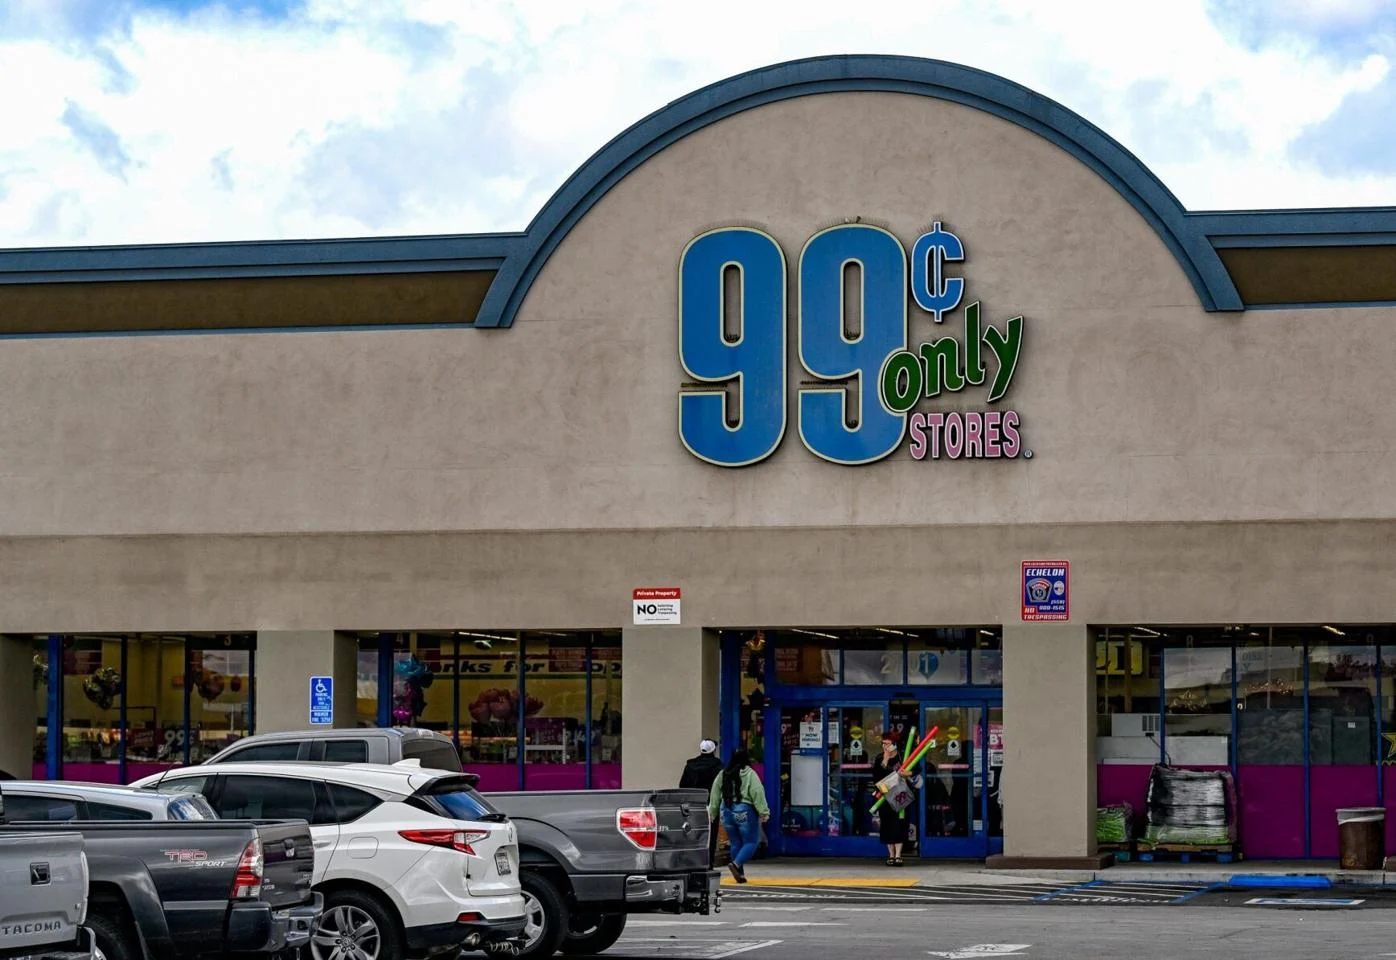 Dollar Tree Takes Over 99 Cents Only Stores: A New Chapter Begins on the West Coast